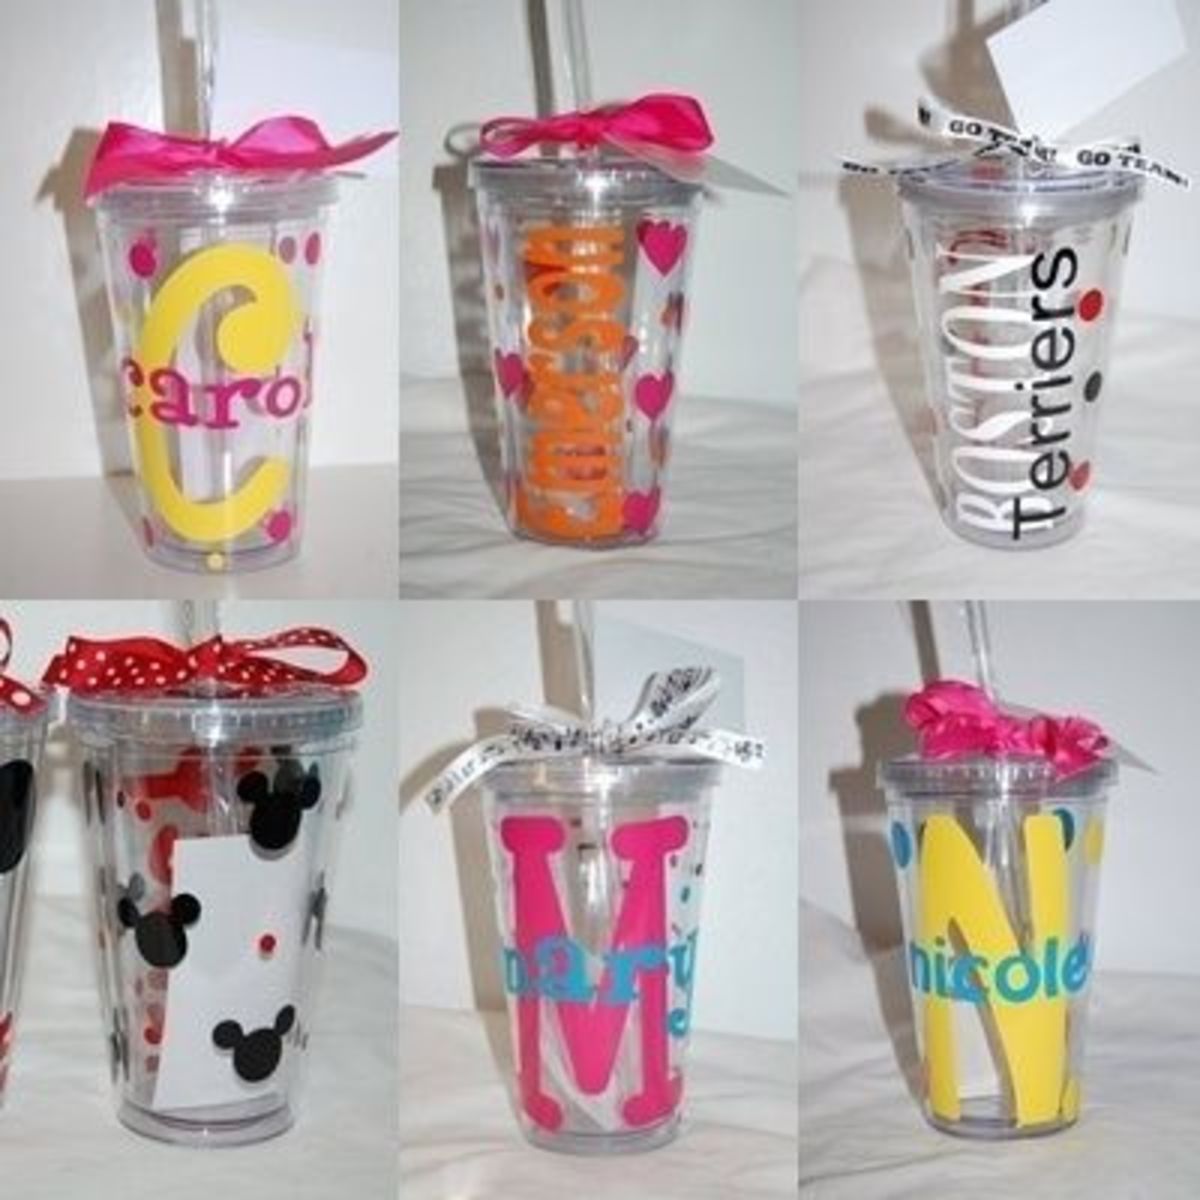 Decorate tumblers with your machine!